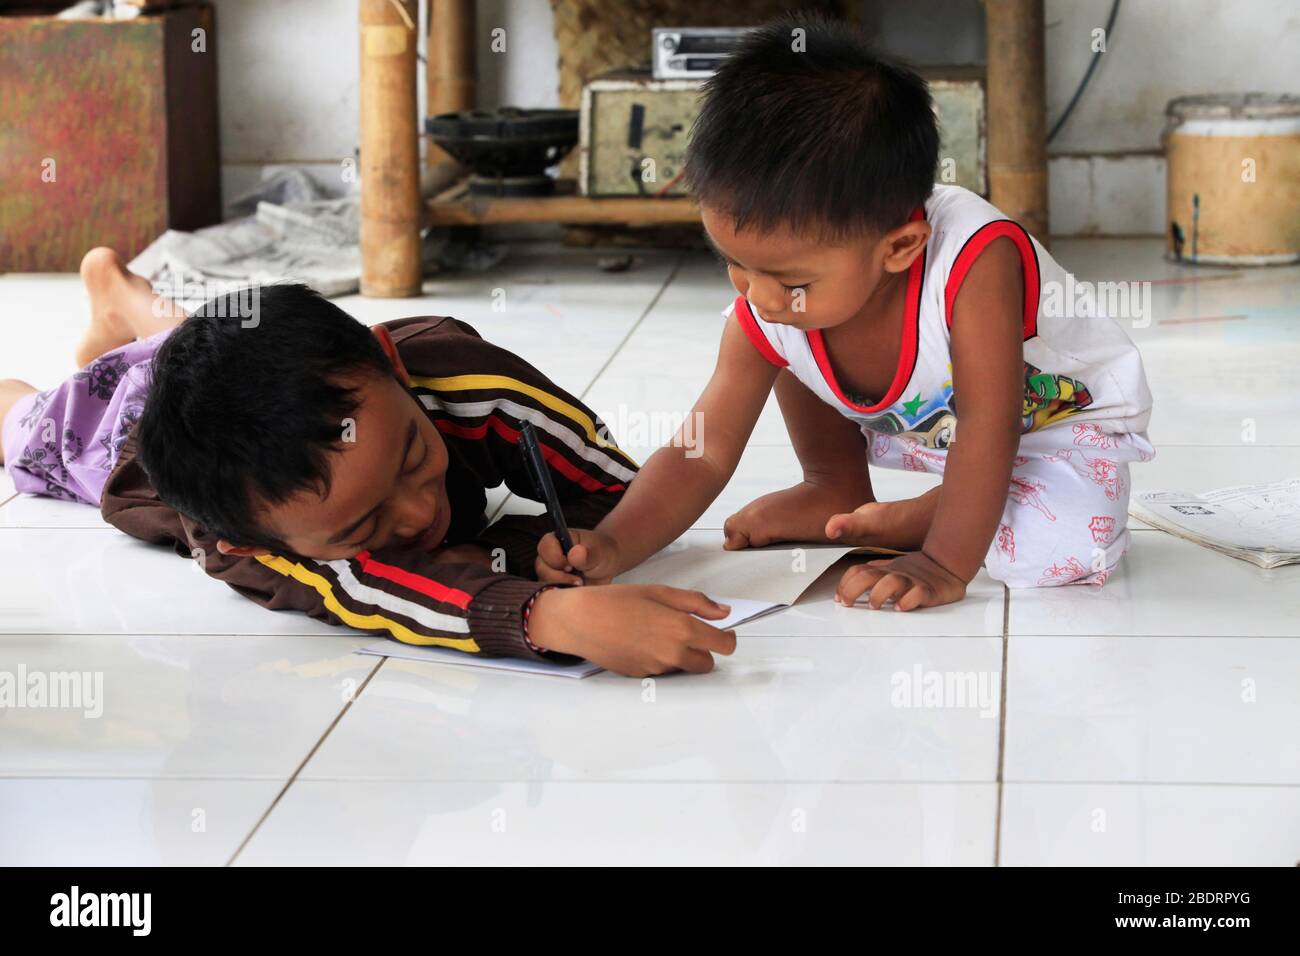 Bali, Indonesia - January 24, 2009: Children of an Indonesian artist paint while sitting on the floor. Bali is famous for talented artists. Bali, Indo Stock Photo